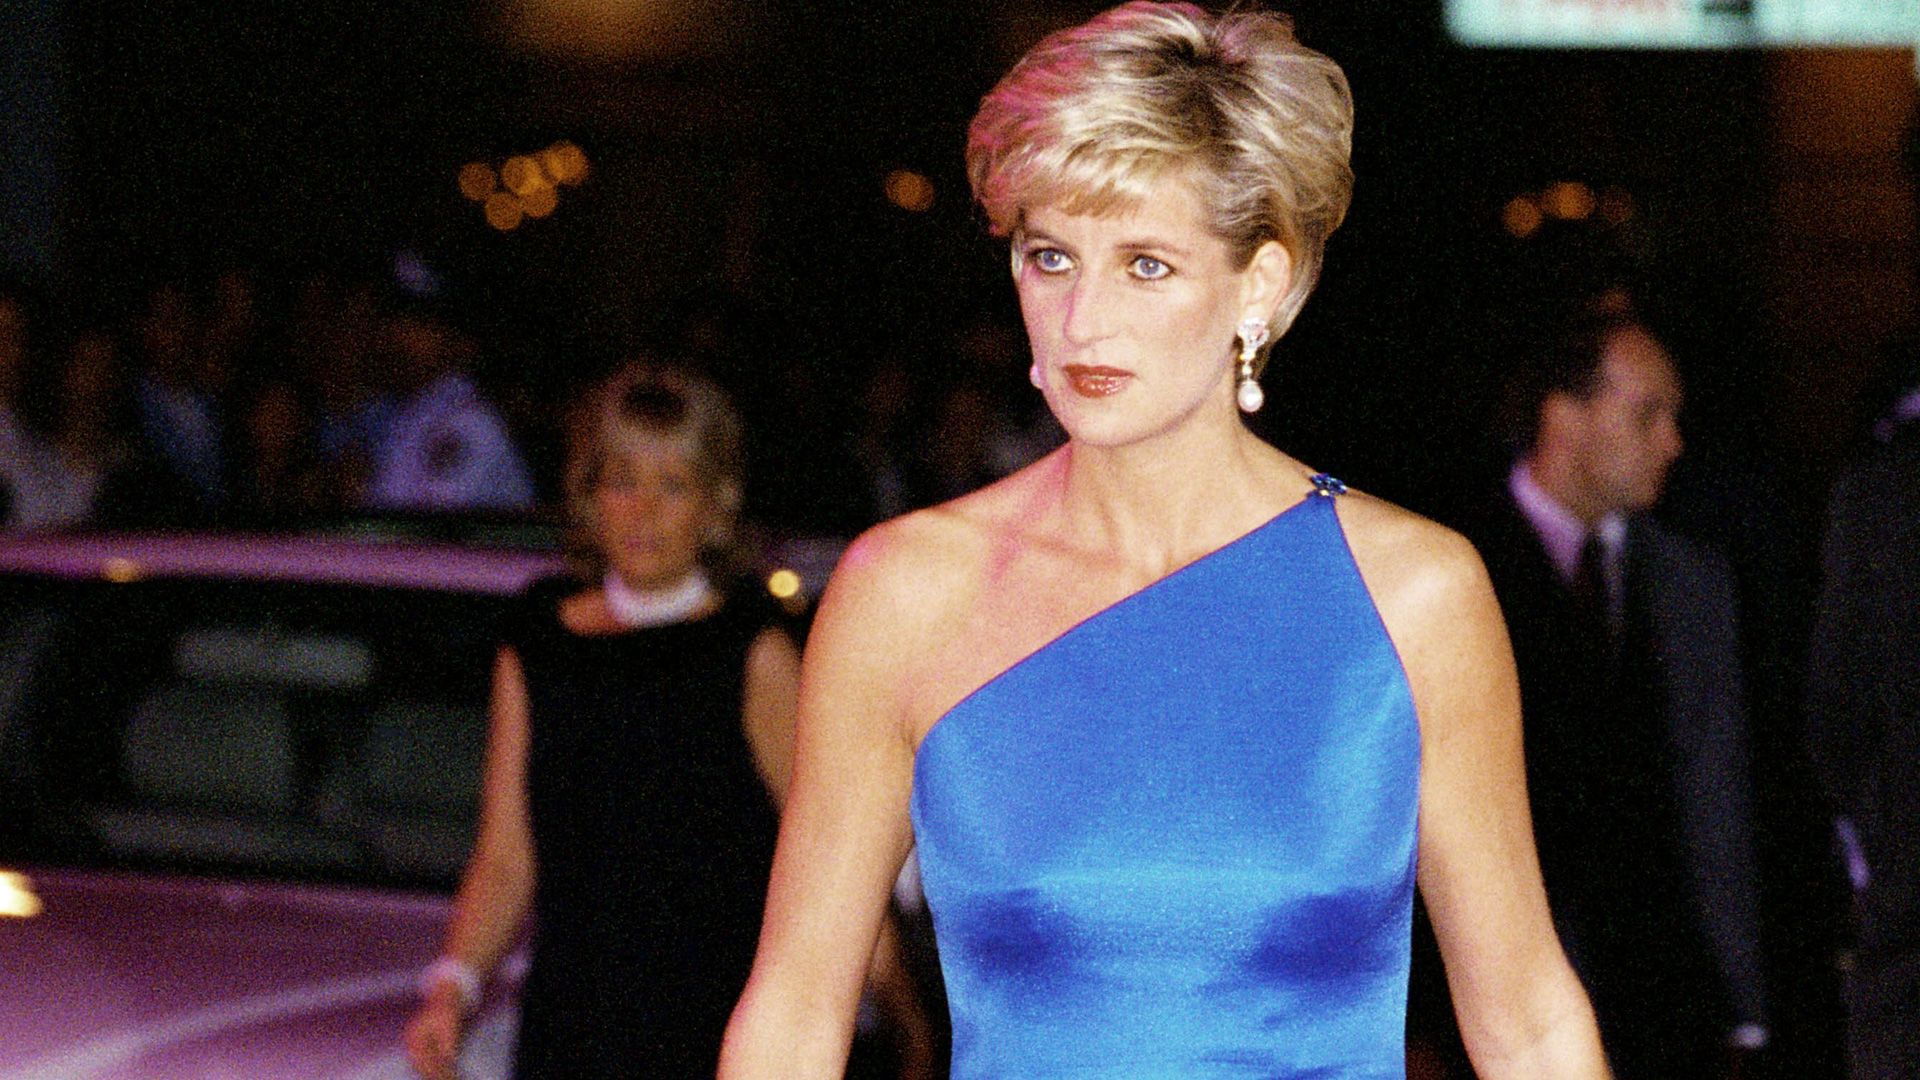 Remembering Princess Diana: How the People's Princess Changed the